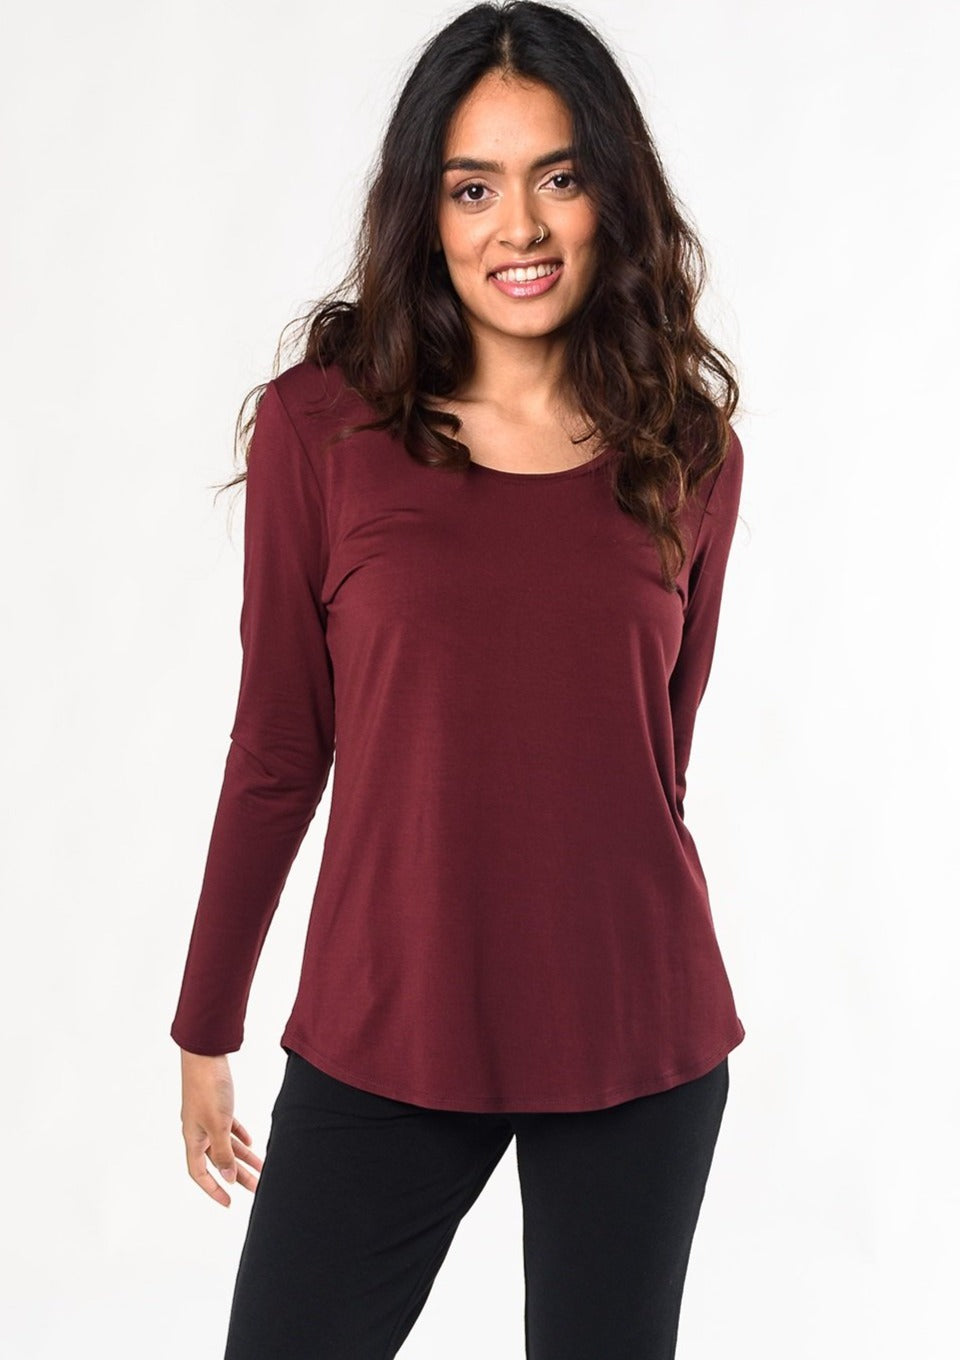 Tops for Women, Sustainable Tops & Tees